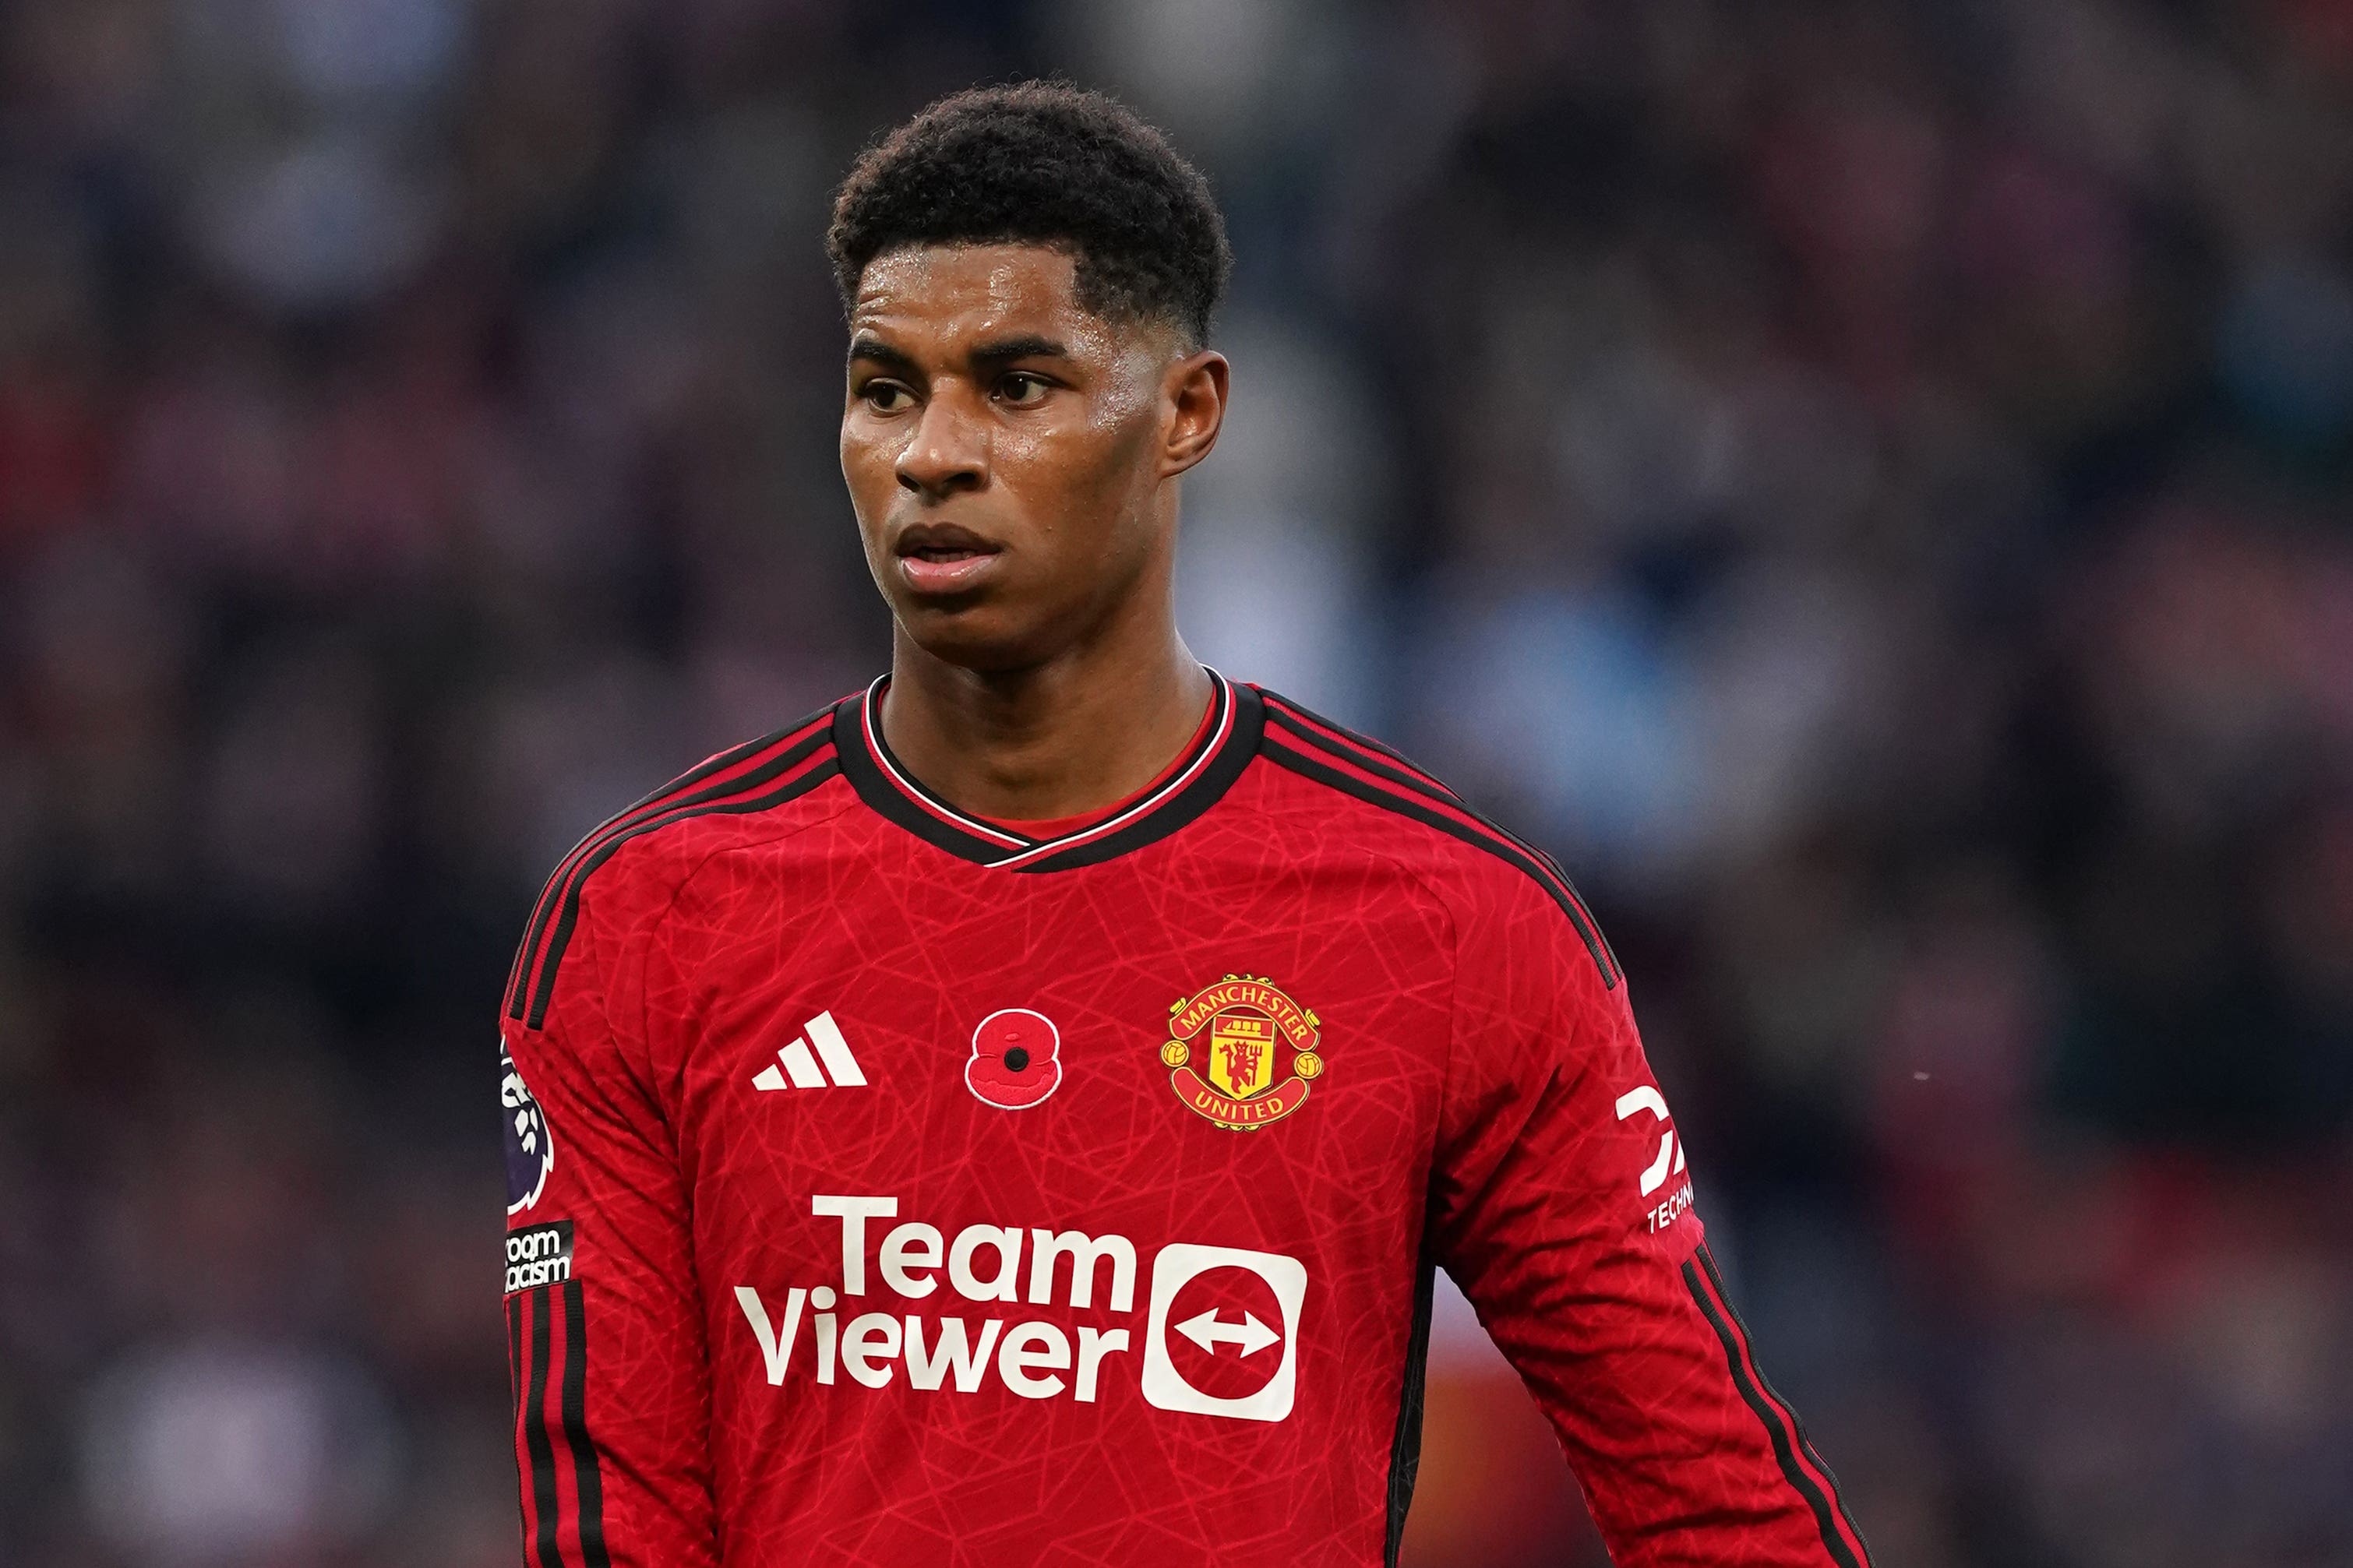 Marcus Rashford has been internally disciplined by Manchester United